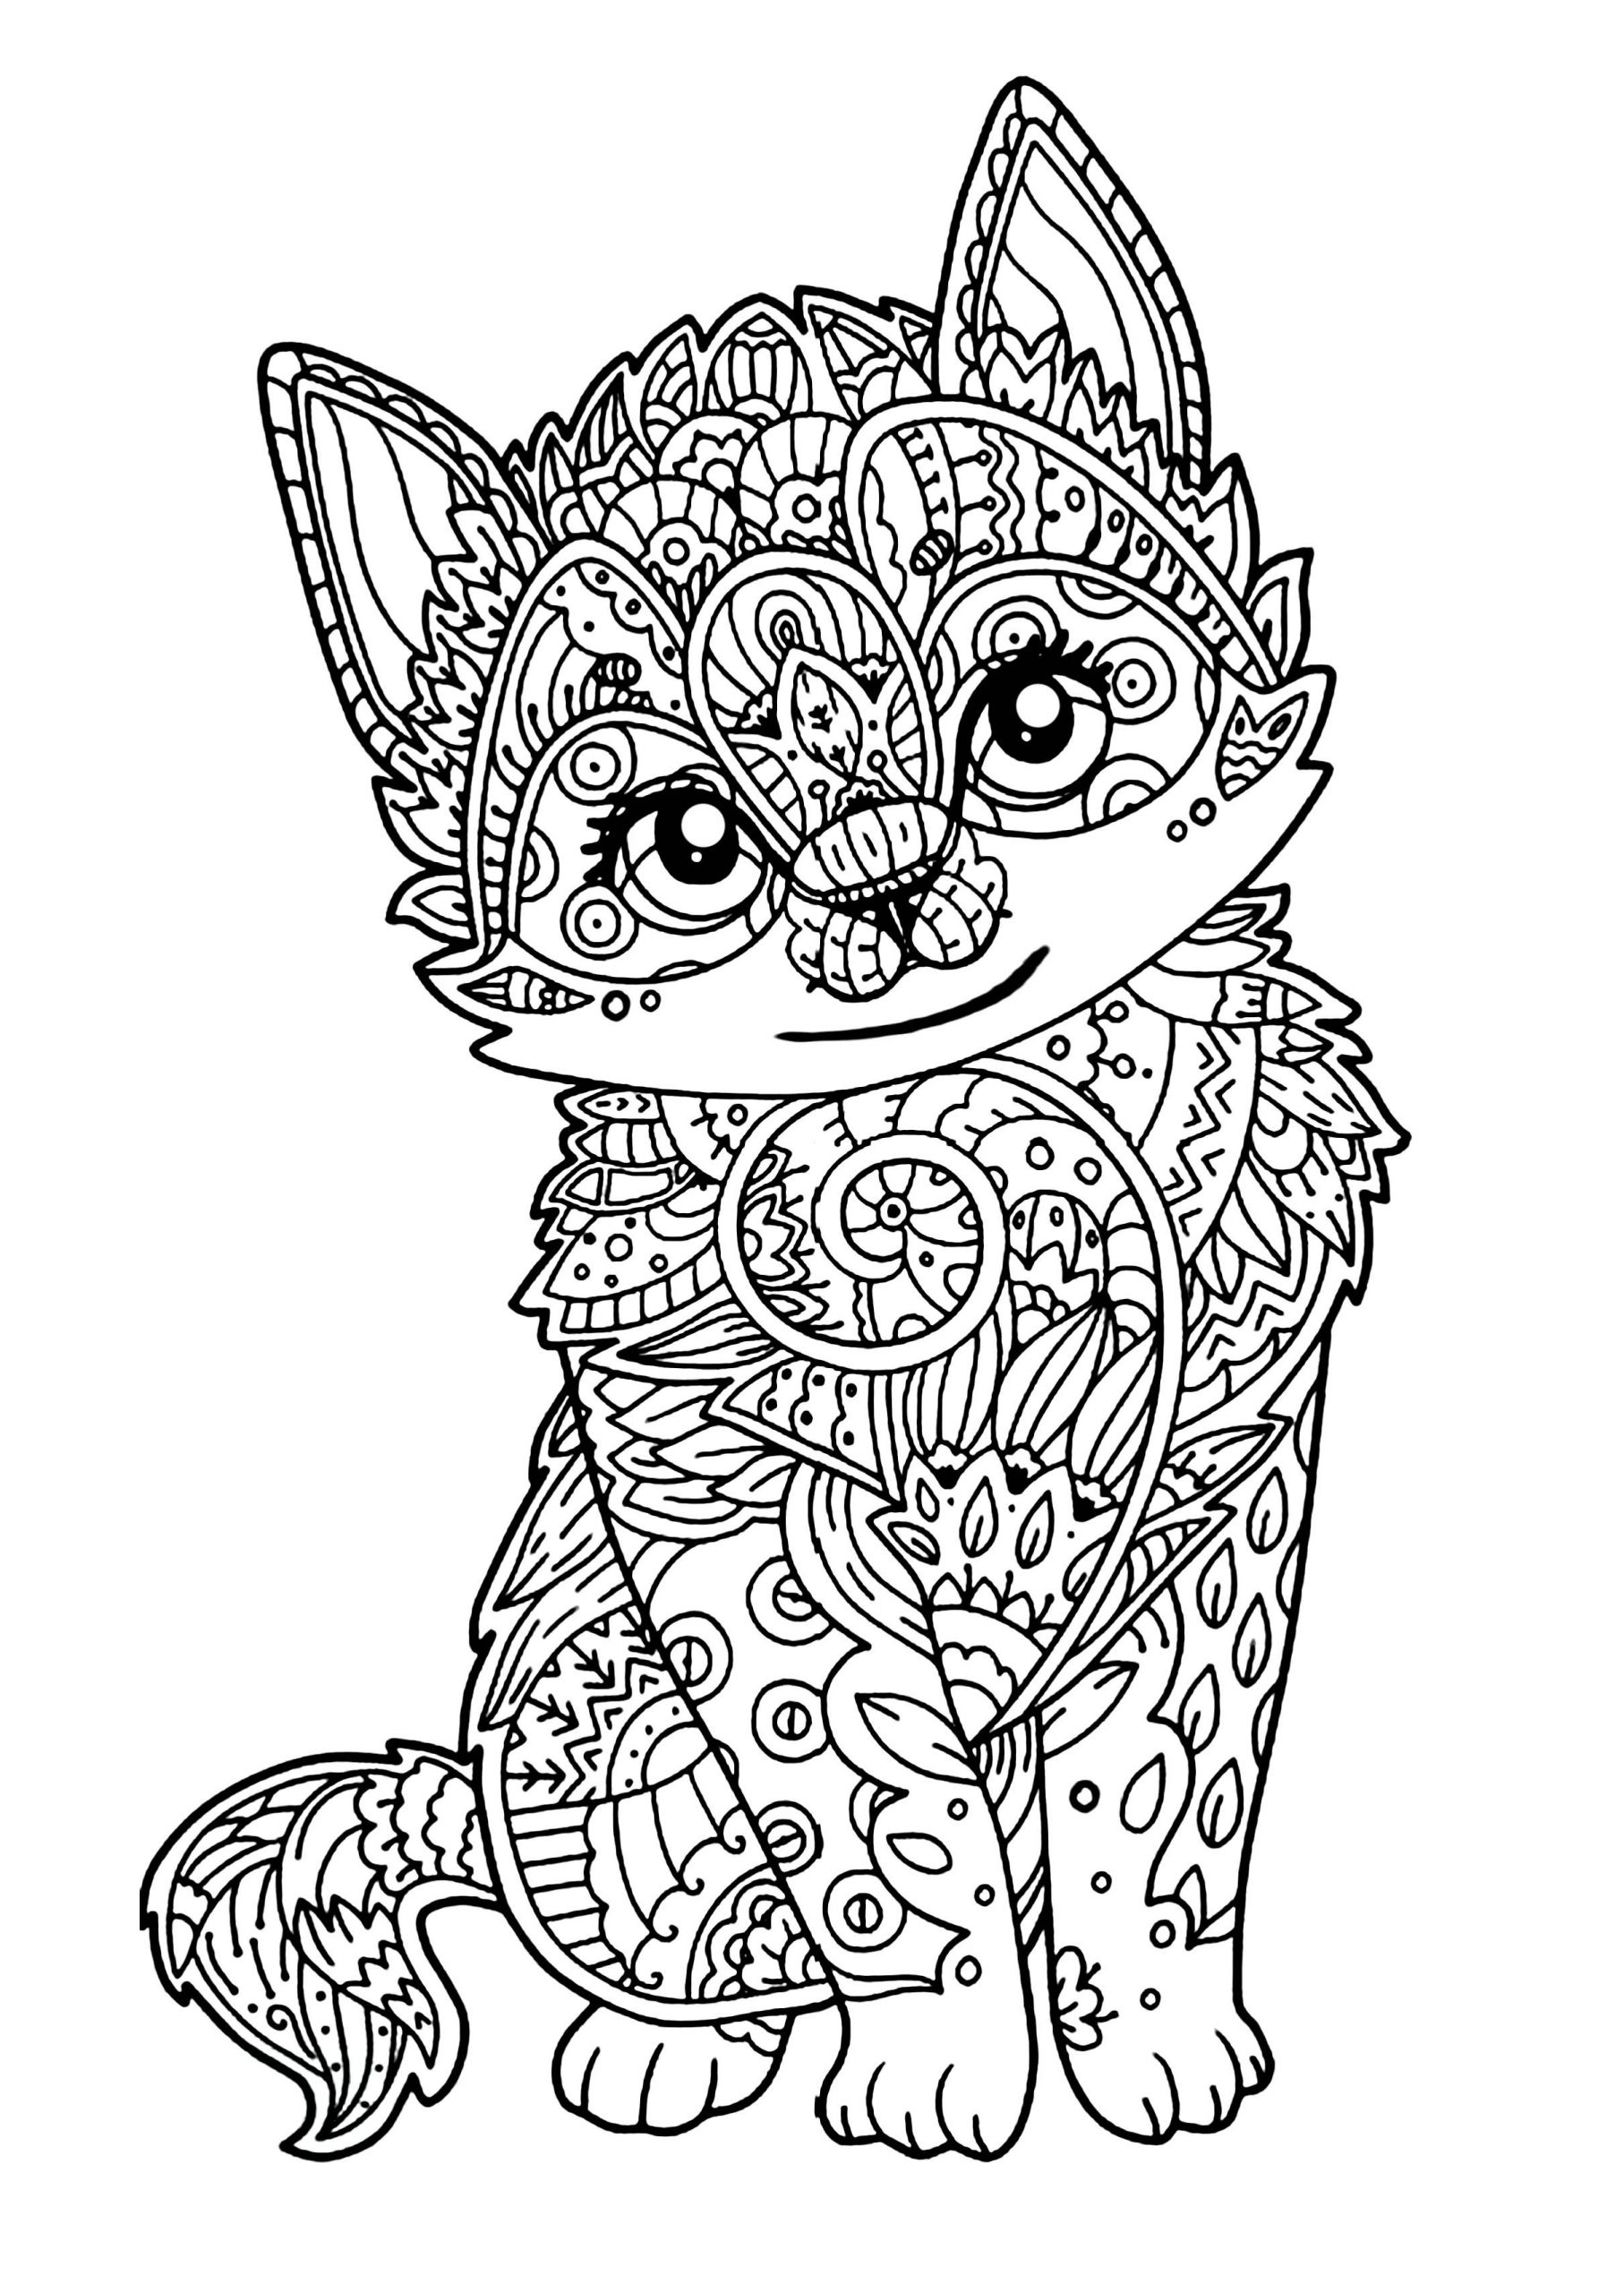 Cat Adult Coloring Pages
 Cute kitten Cats Adult Coloring Pages